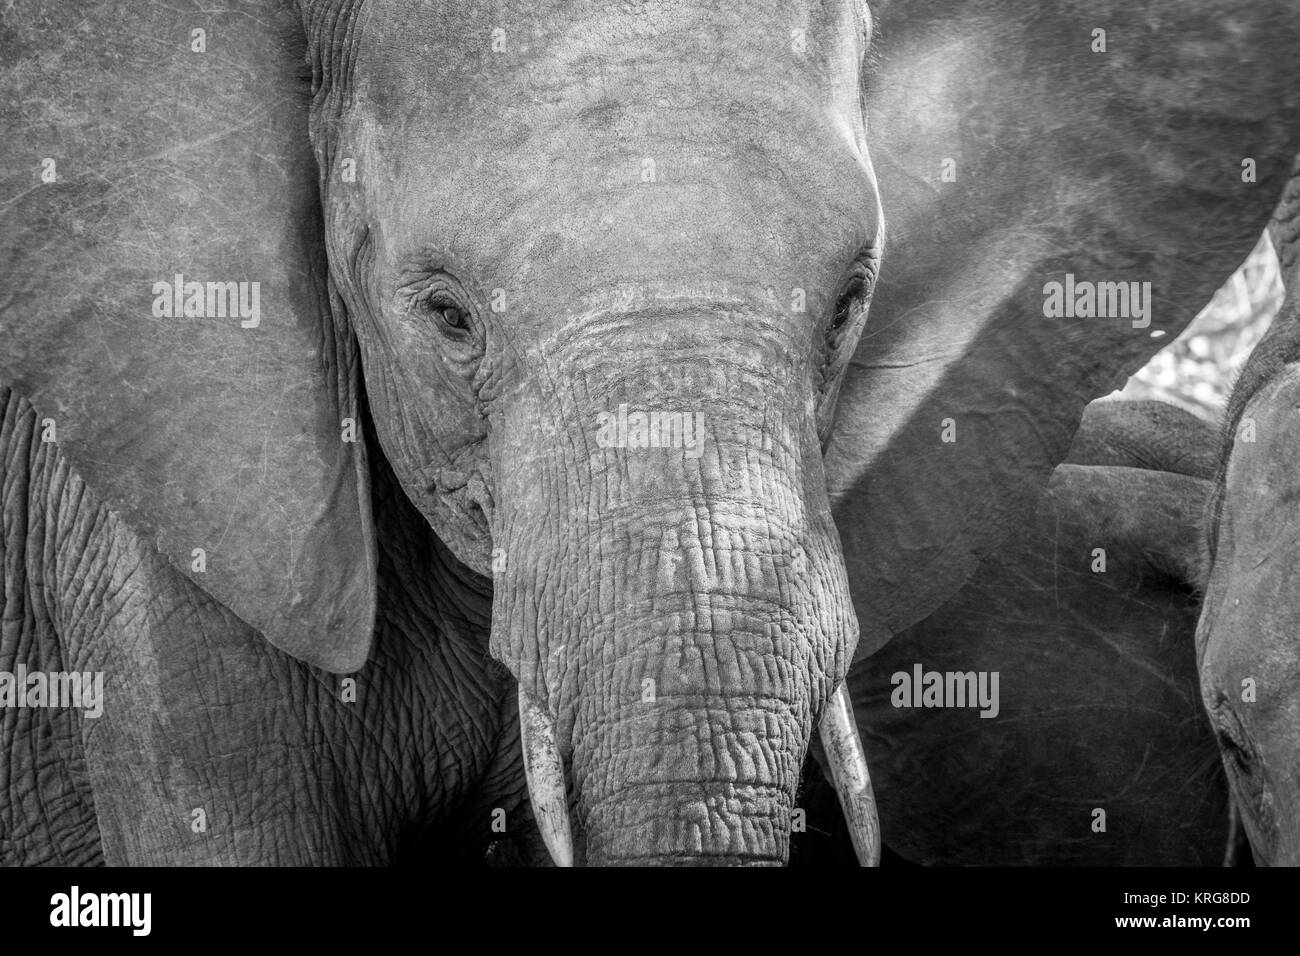 Close up of an Elephant head in black and white. Stock Photo